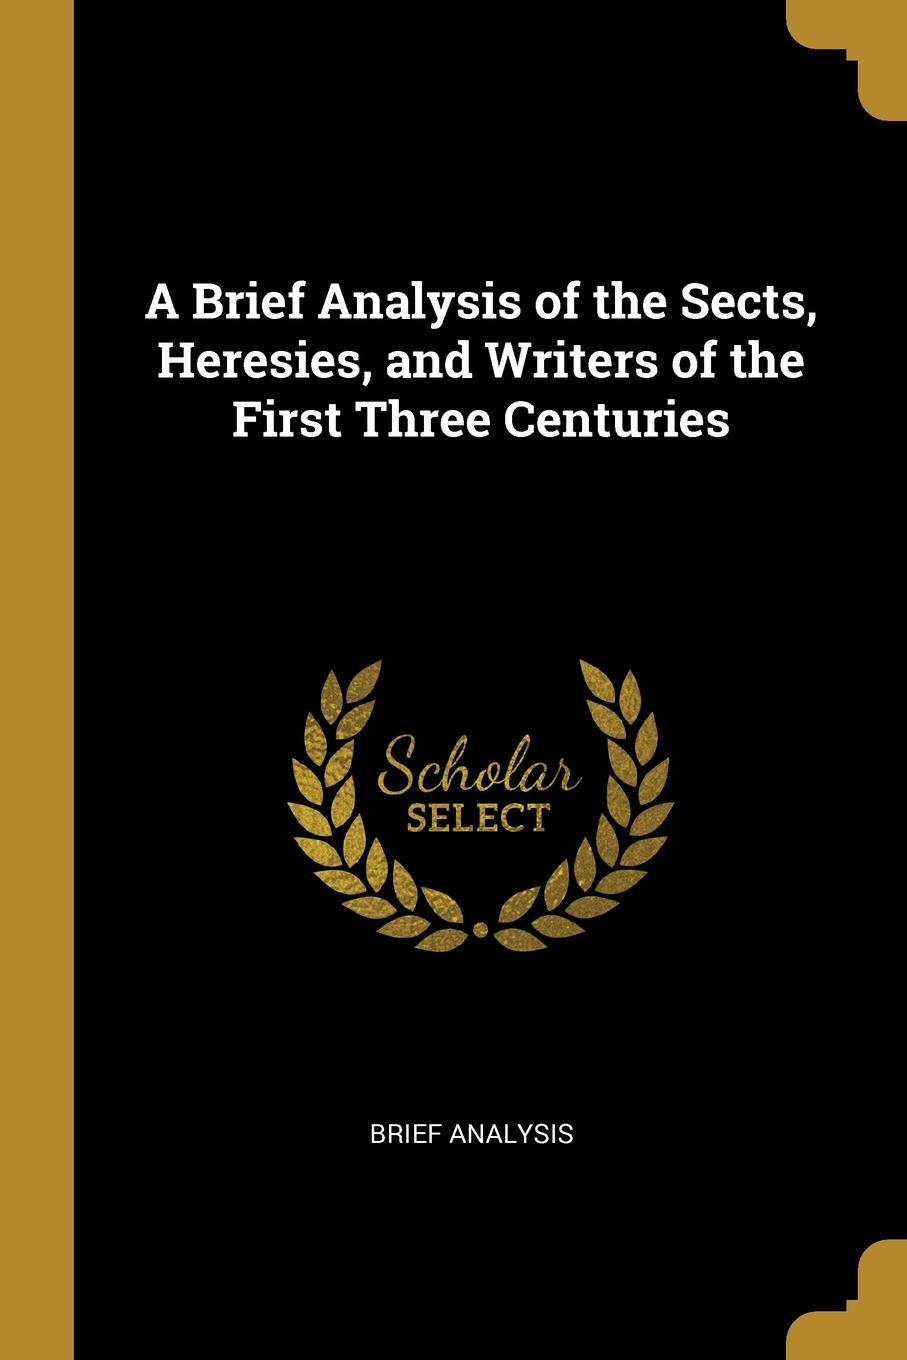 A Brief Analysis of the Sects, Heresies, and Writers of the First Three Centuries